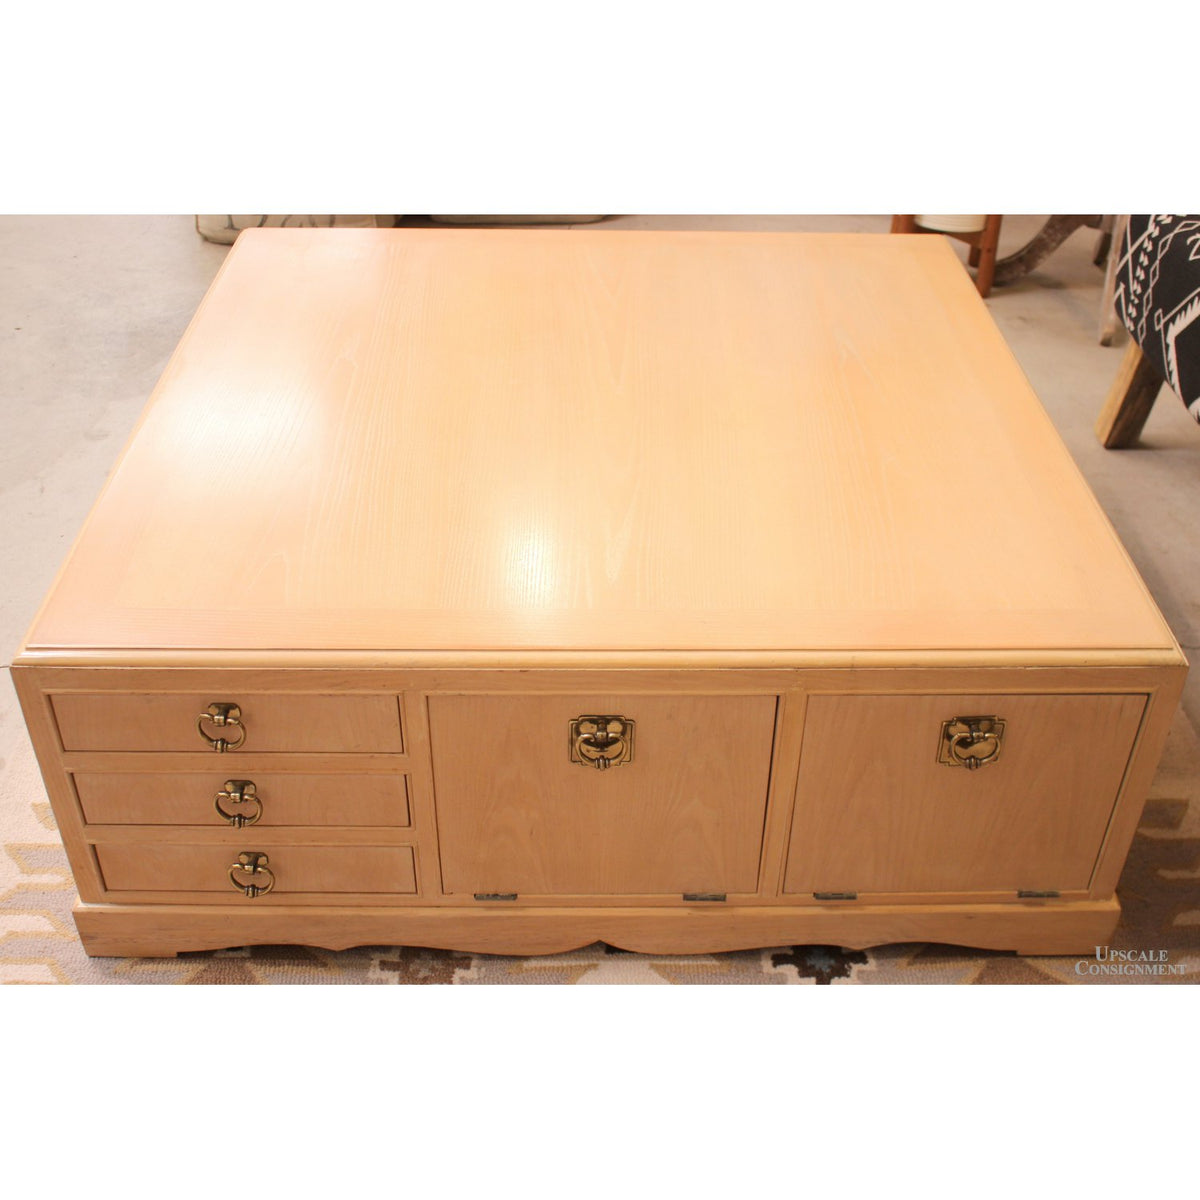 Sherrill Square Coffee Table w/Drawers